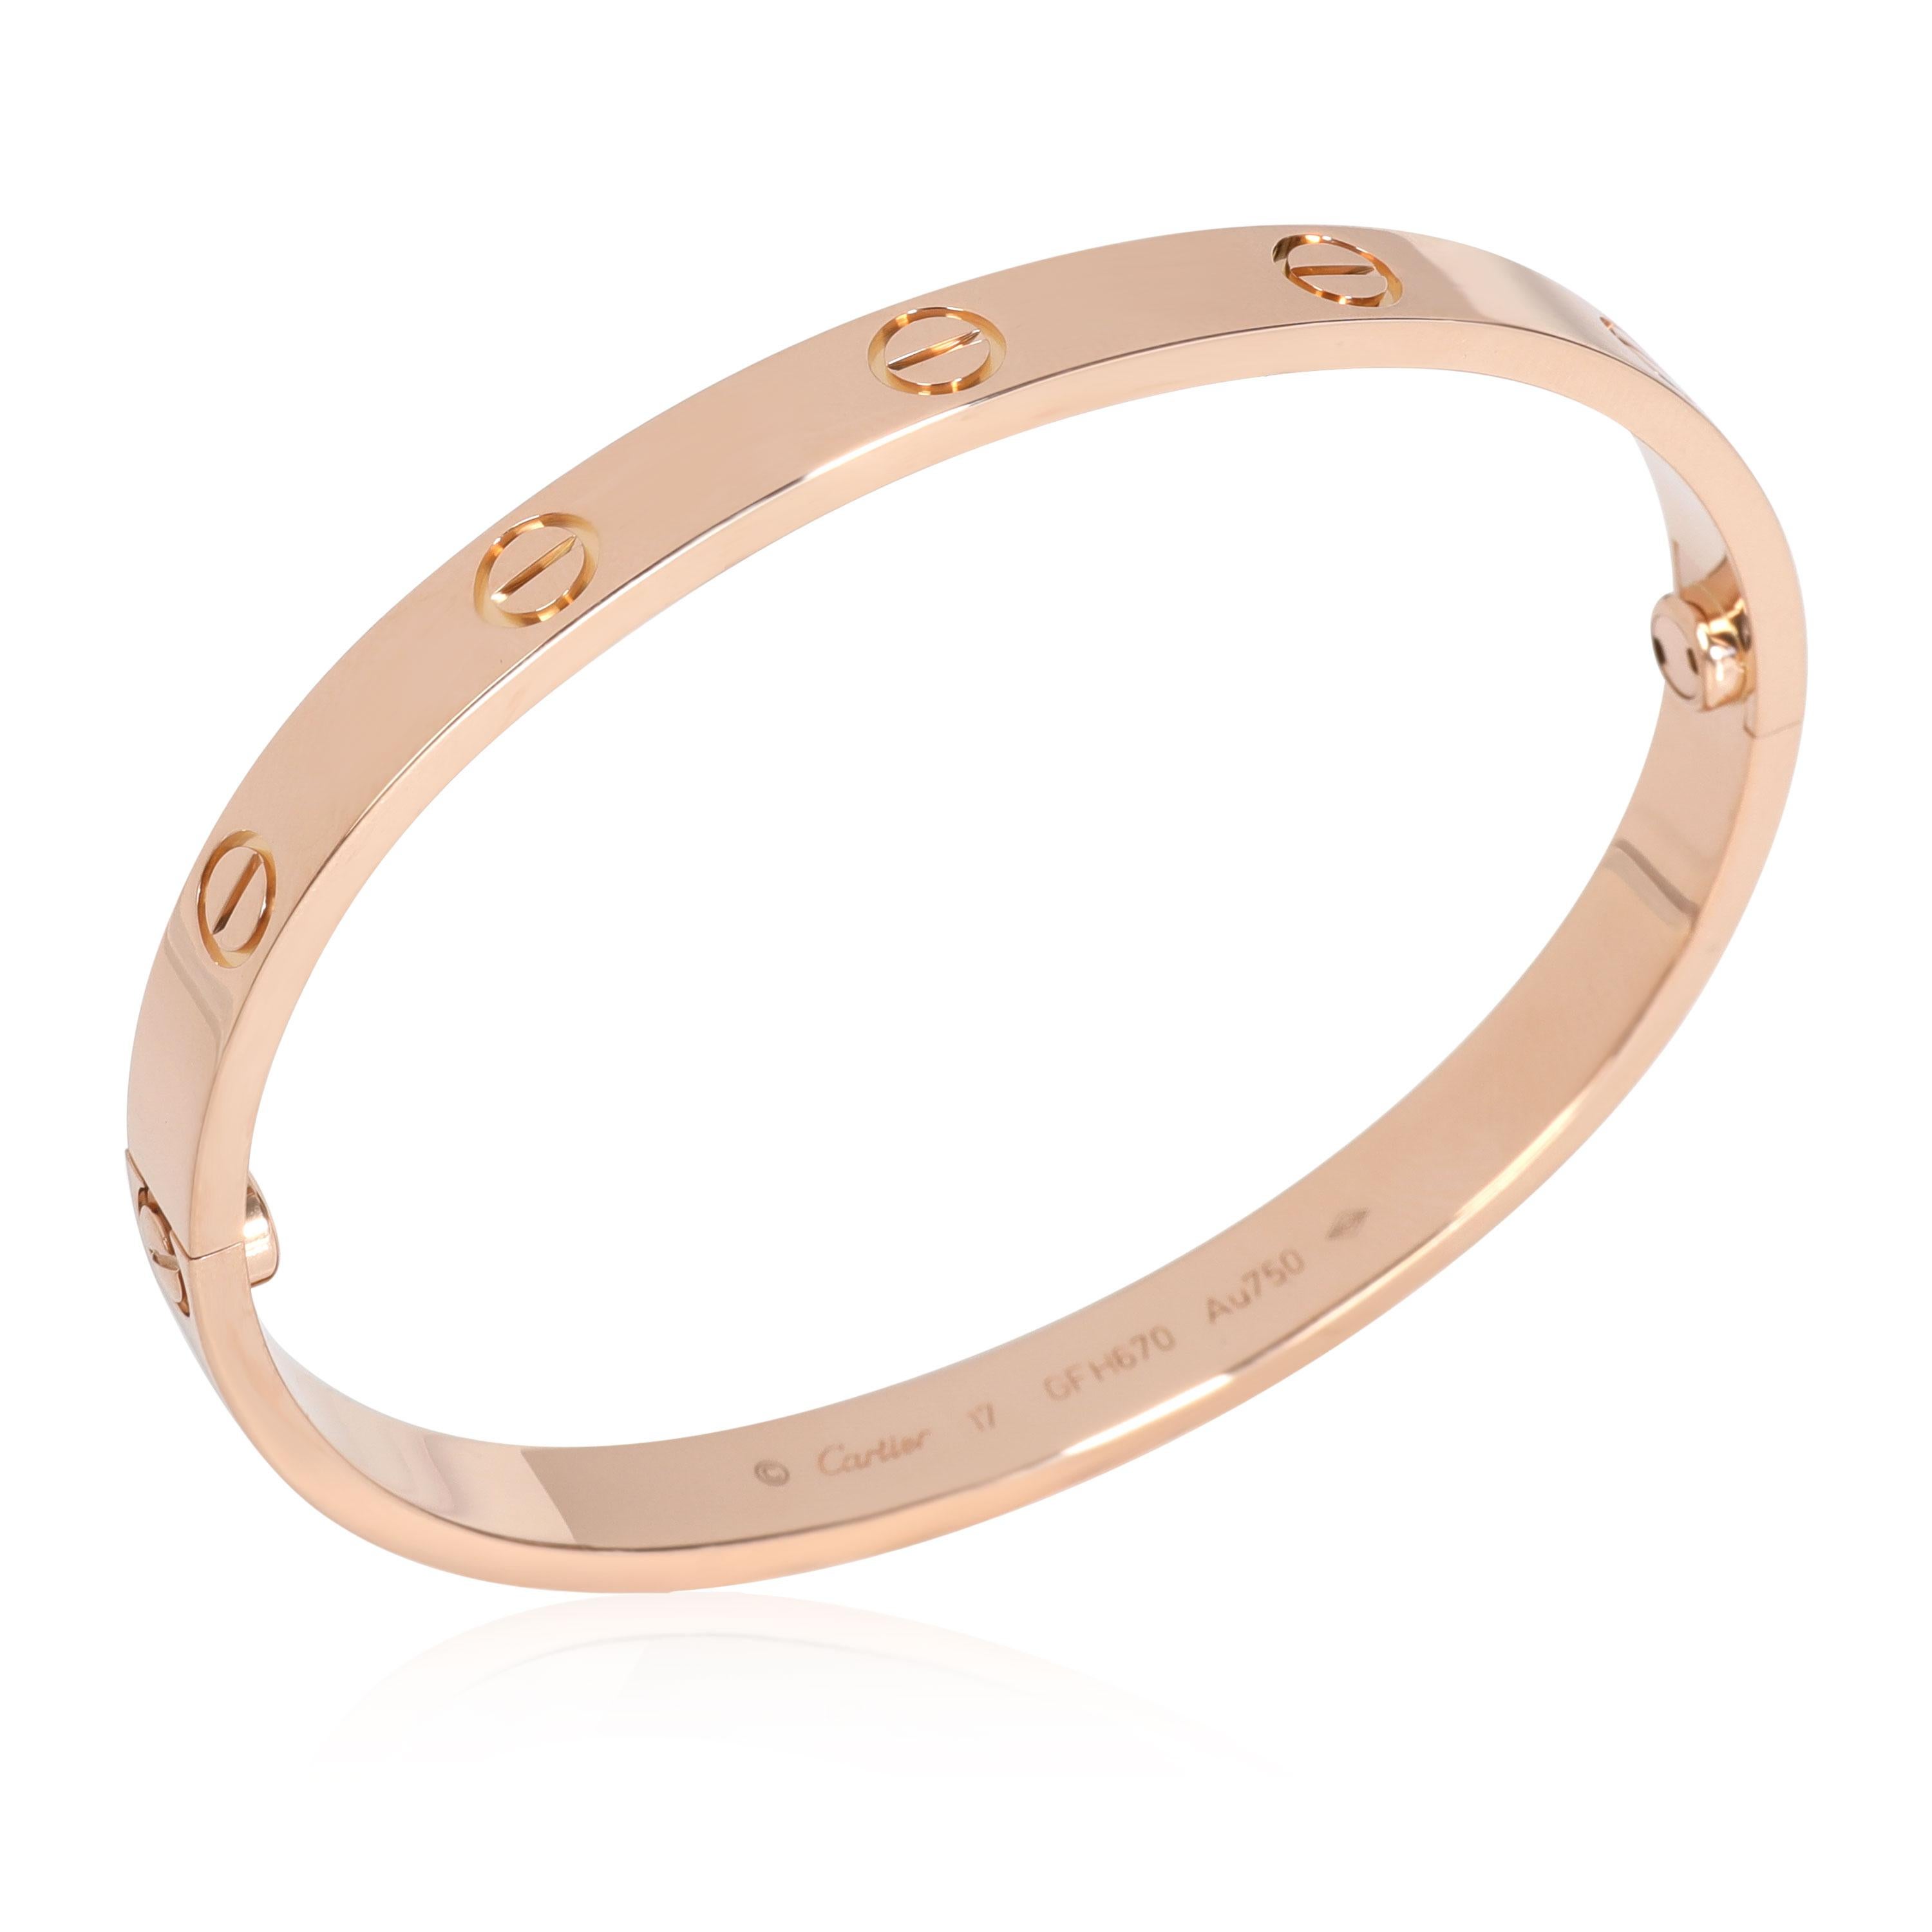 Cartier Love Bracelet in 18k Rose Gold

PRIMARY DETAILS
SKU: 113454
Listing Title: Cartier Love Bracelet in 18k Rose Gold
Condition Description: Retails for 6900 USD. In excellent condition and recently polished. Size 17. Comes with Box; pouch;